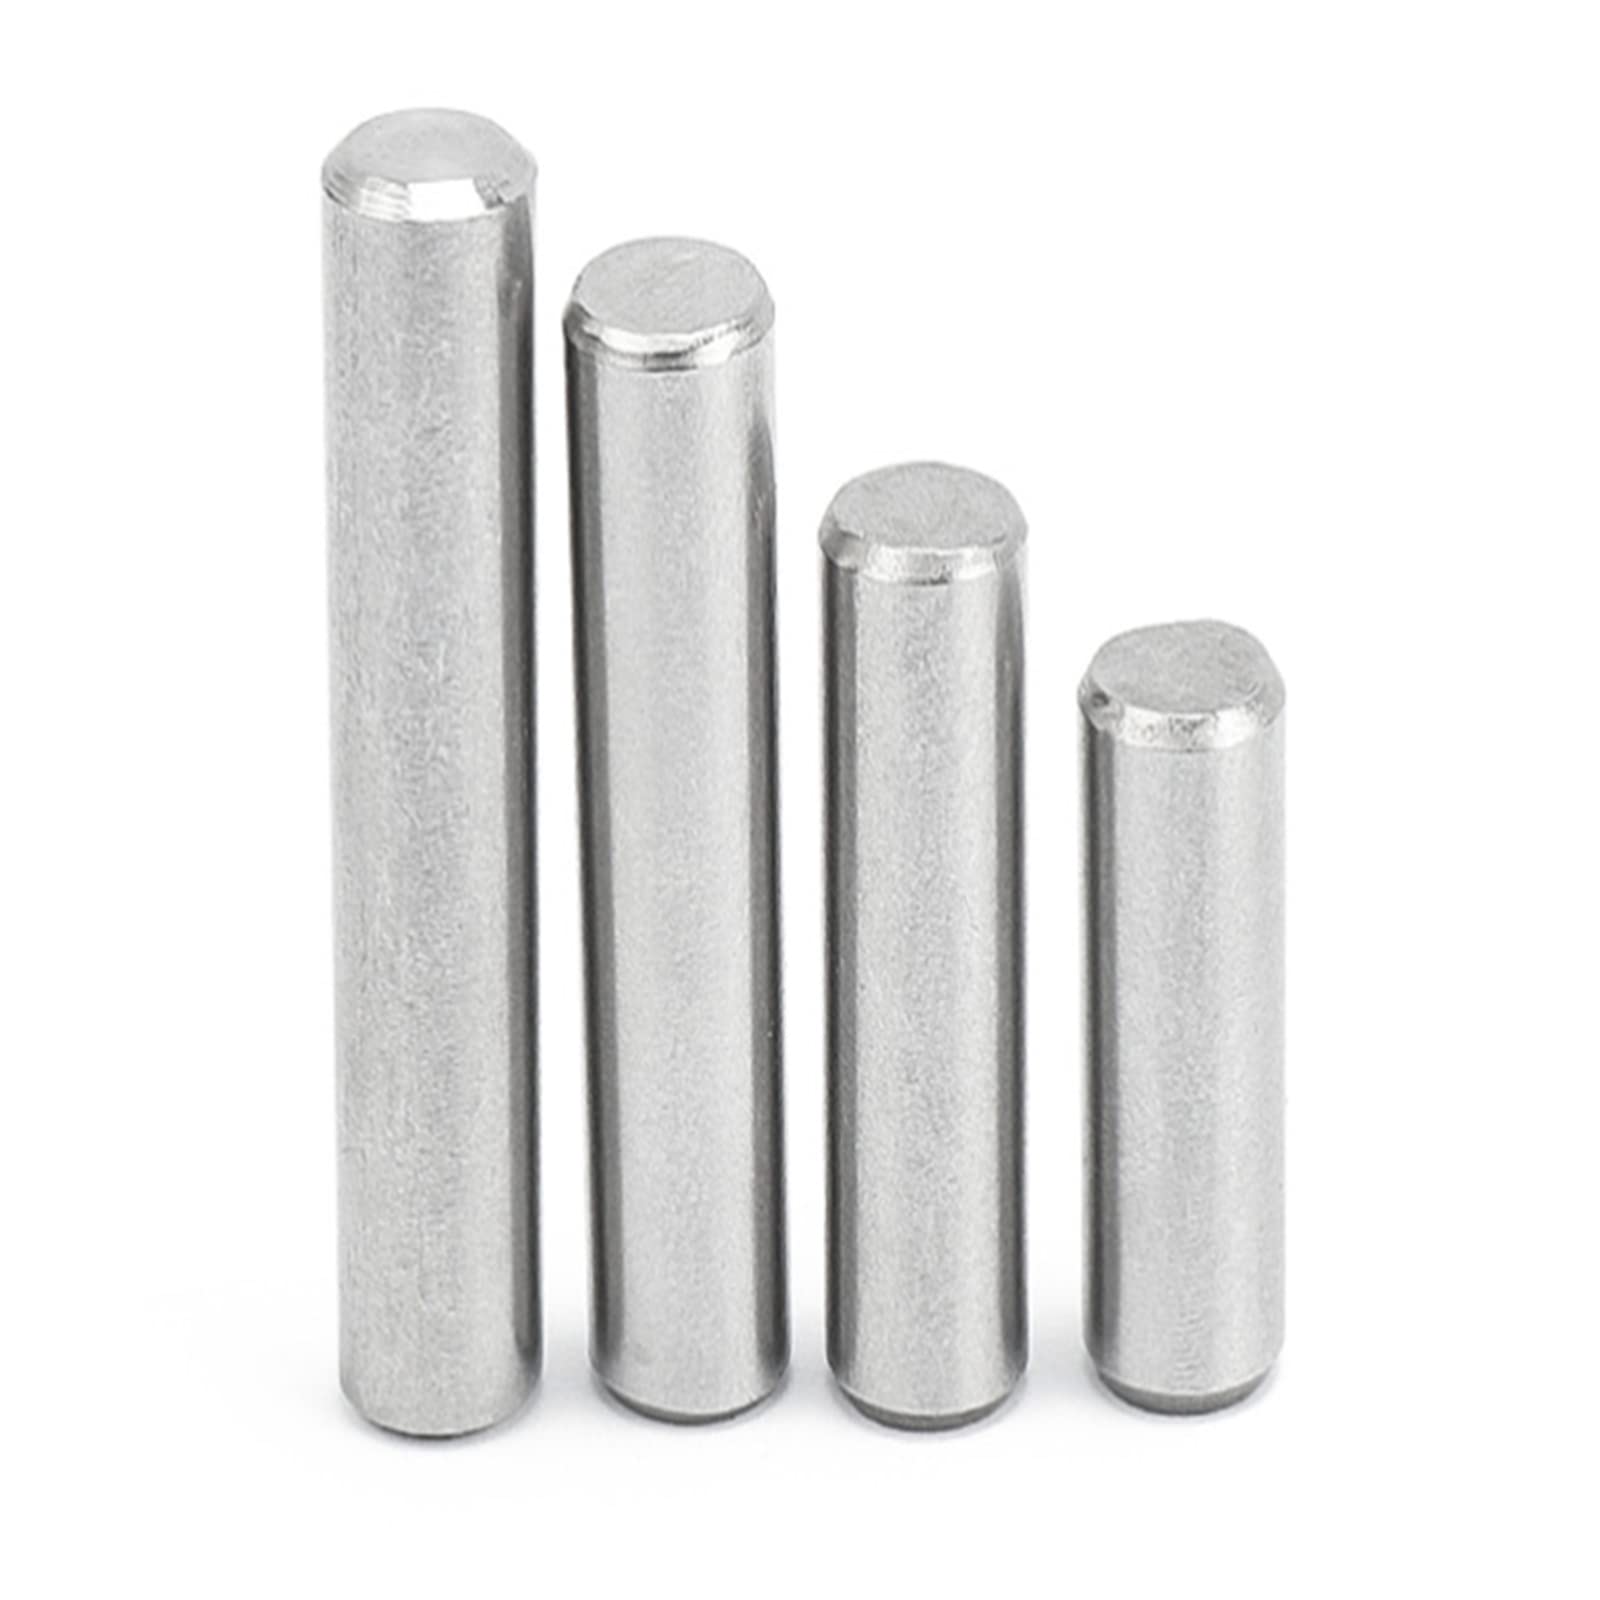 Boxonly 5 PCS M5x5mm Dowel Pins 304 Stainless Steel Cylindrical Pin Pegs Support Shelves Fasten Elements GB119 Fixed Pin Shaft